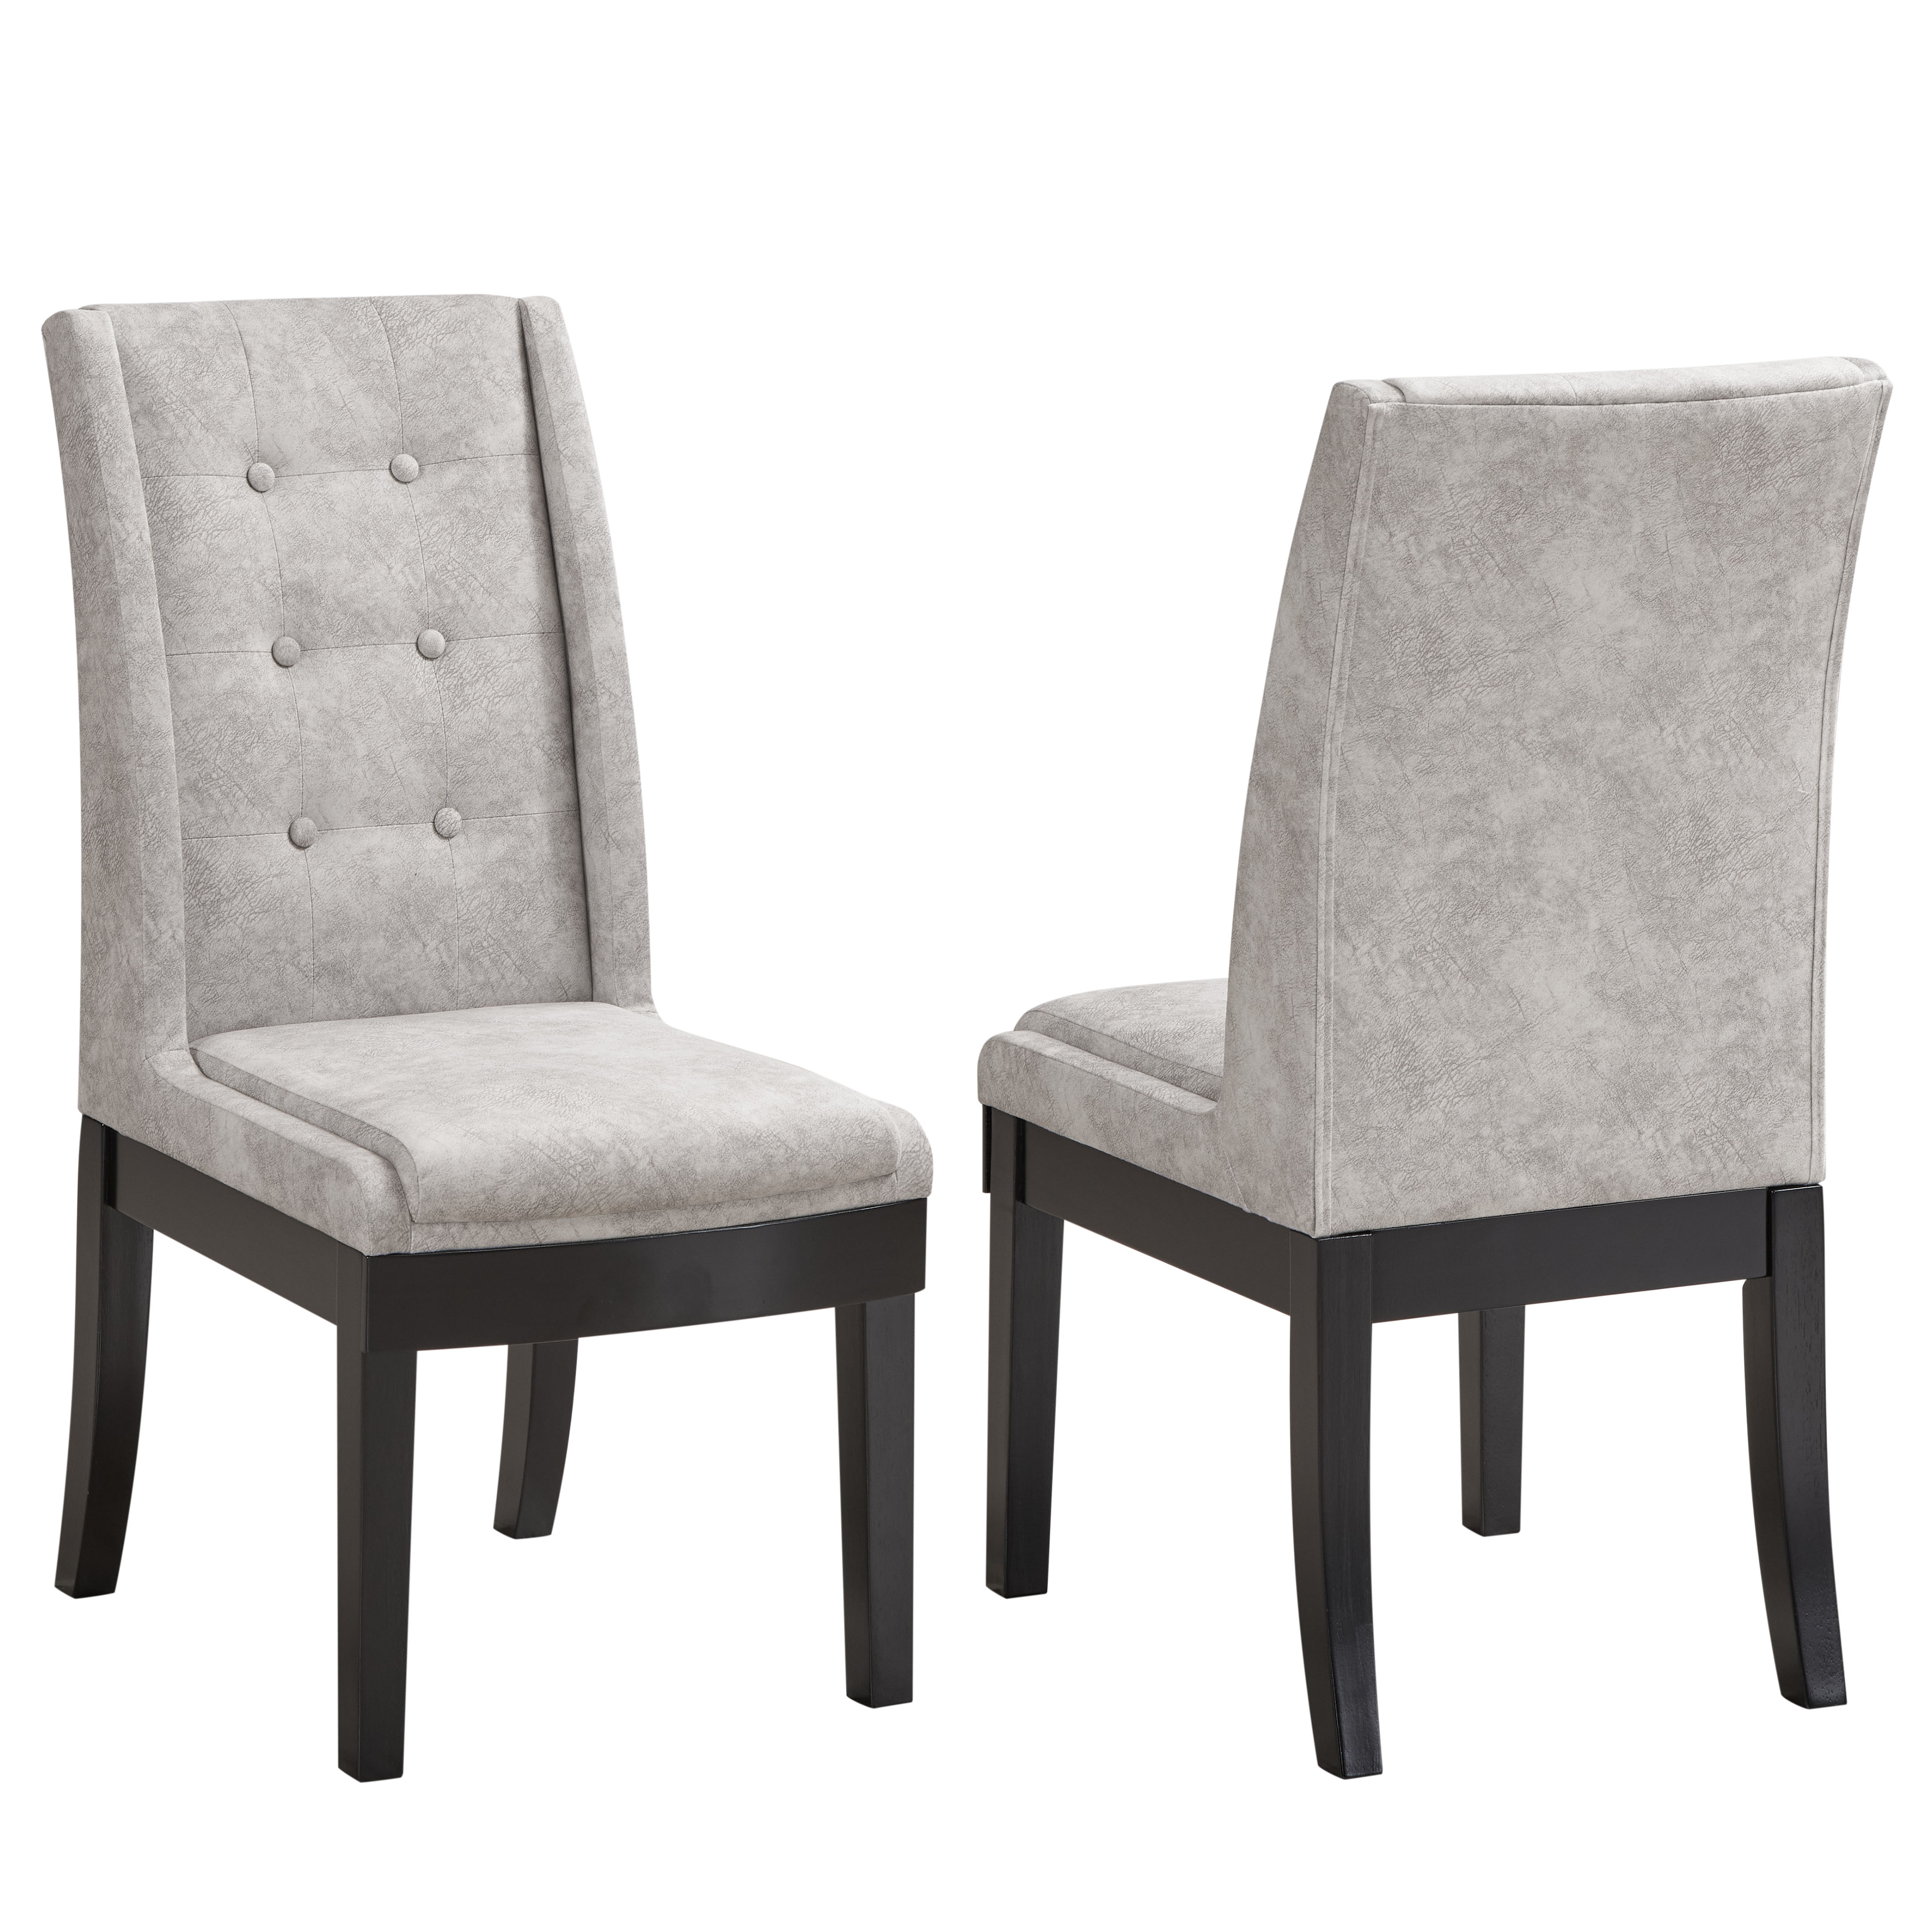 Bierce Dining Chairs - Set of 2 (Silver)